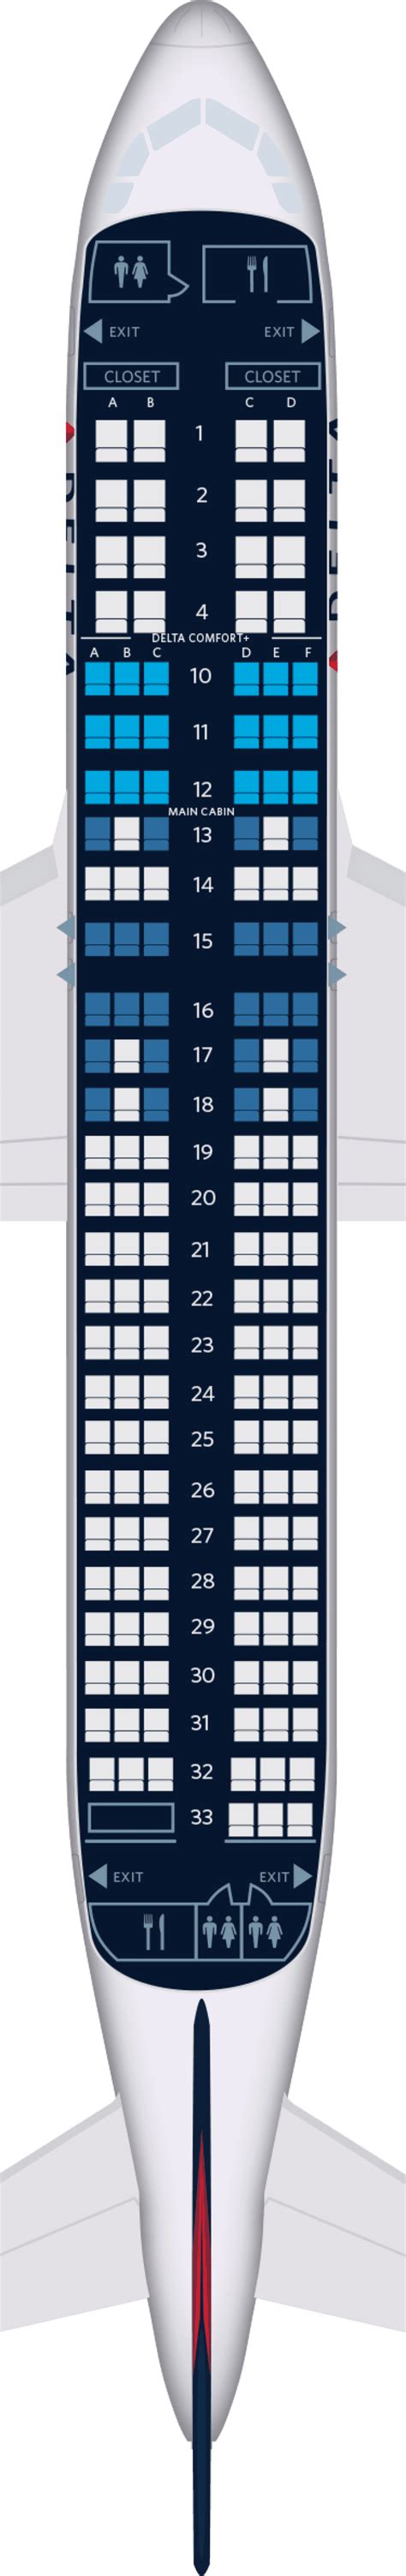 Airbus A320 Aircraft Seat Maps Specs And Amenities